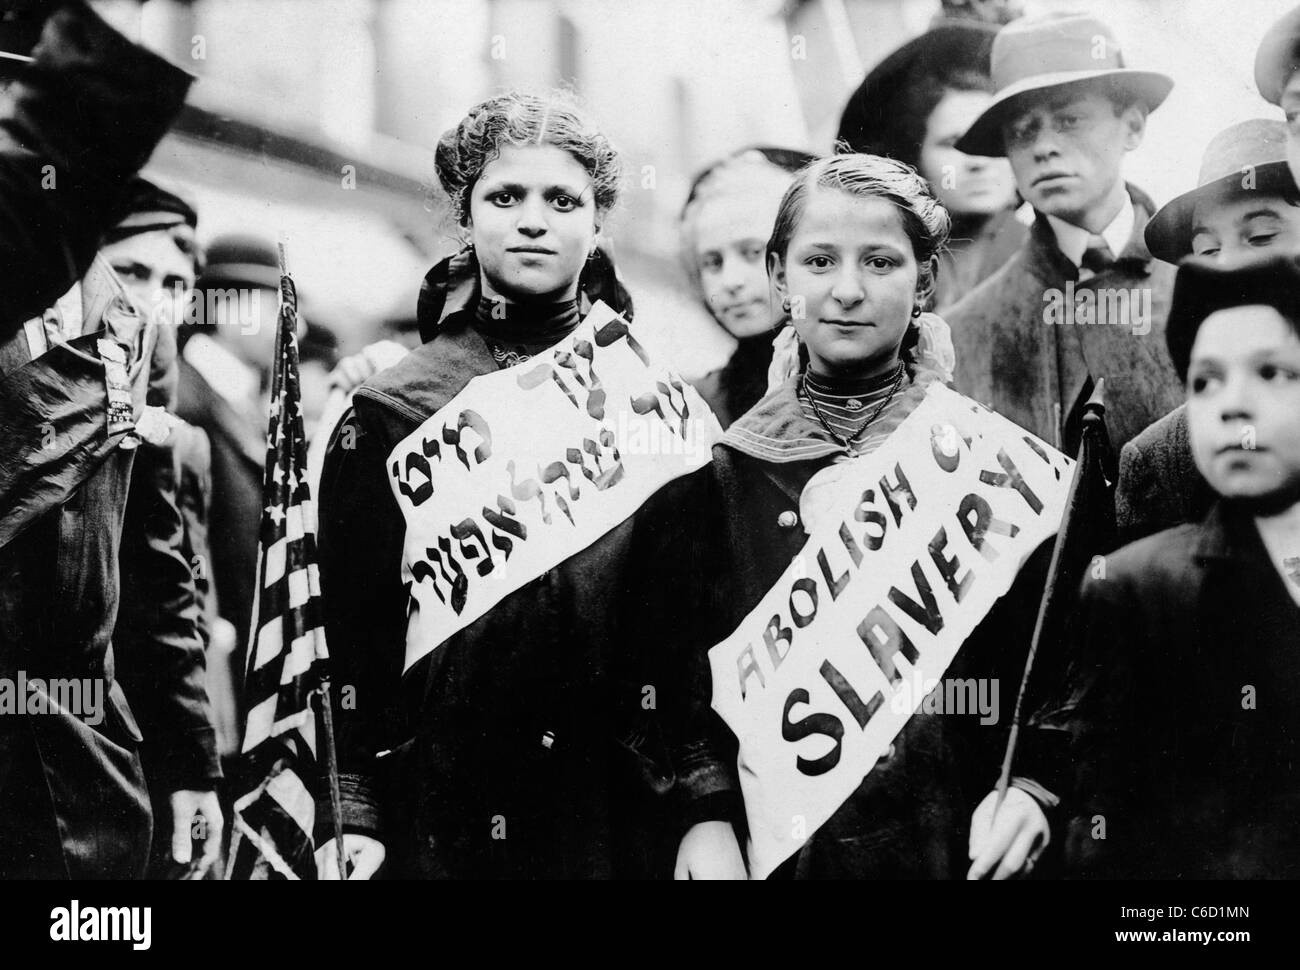 Protest against child labor in a labor parade in New York City, May 1, 1909 Stock Photo